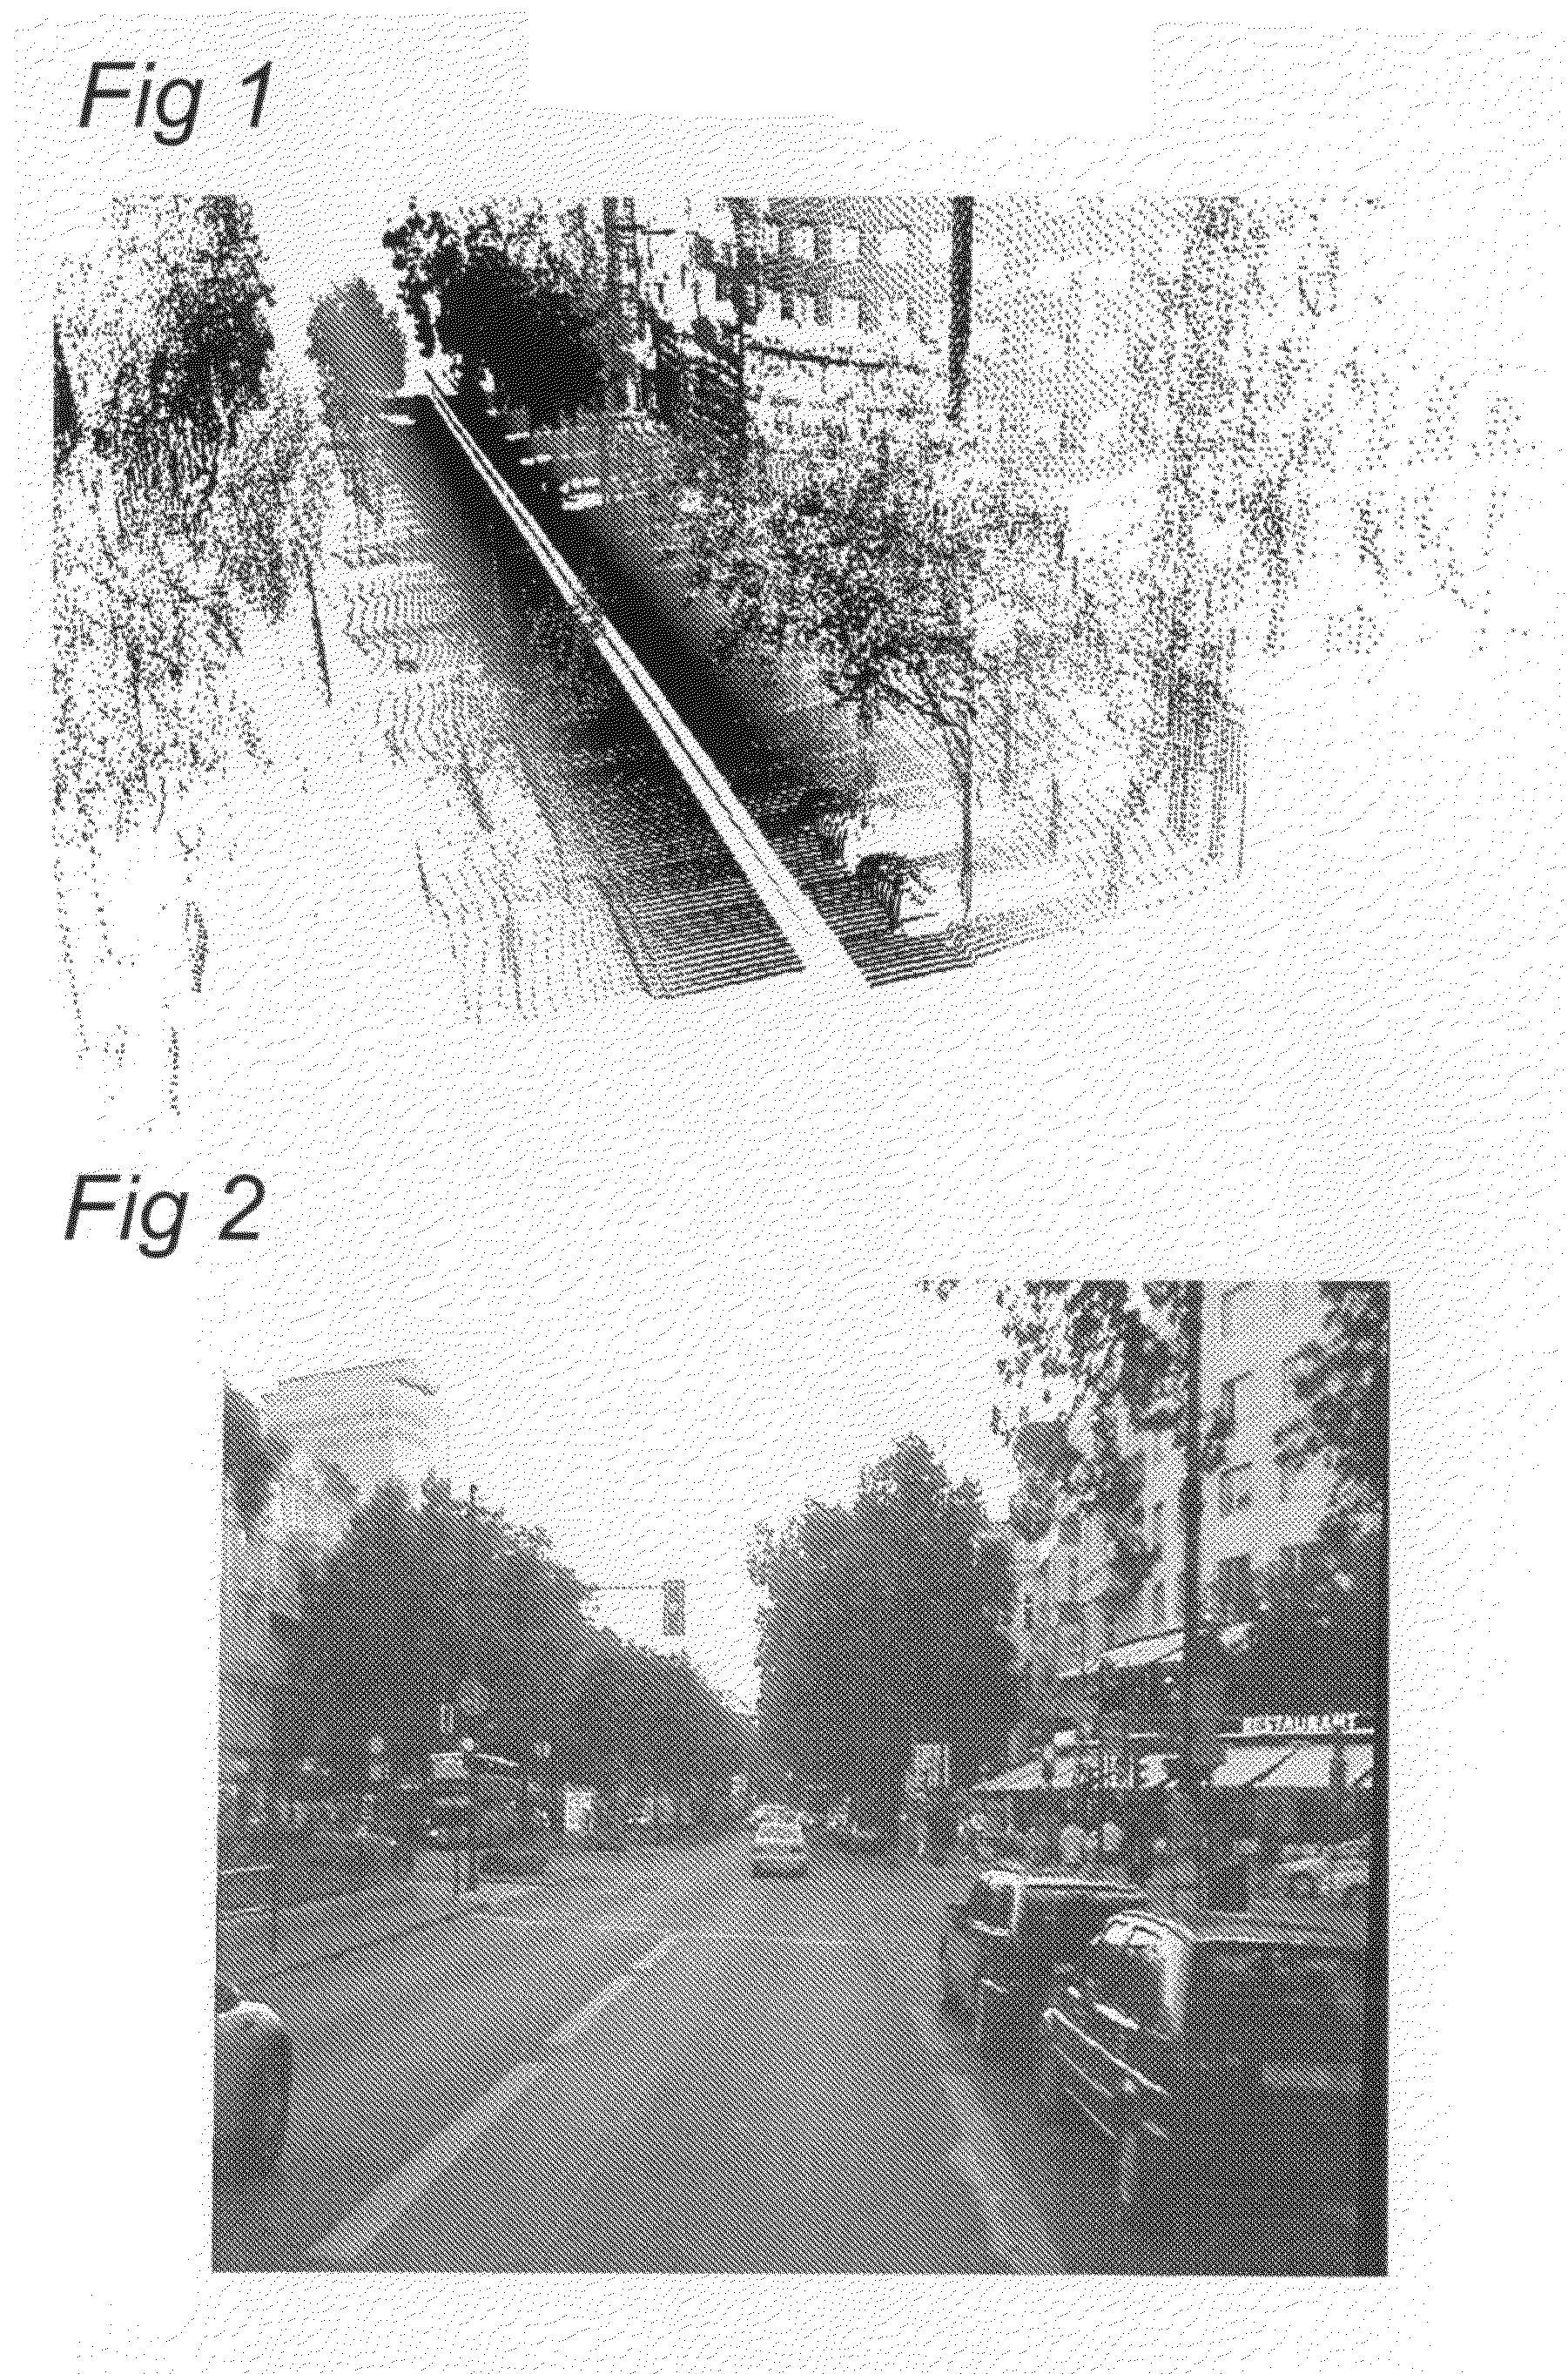 Method and apparatus for detecting objects from terrestrial based mobile mapping data